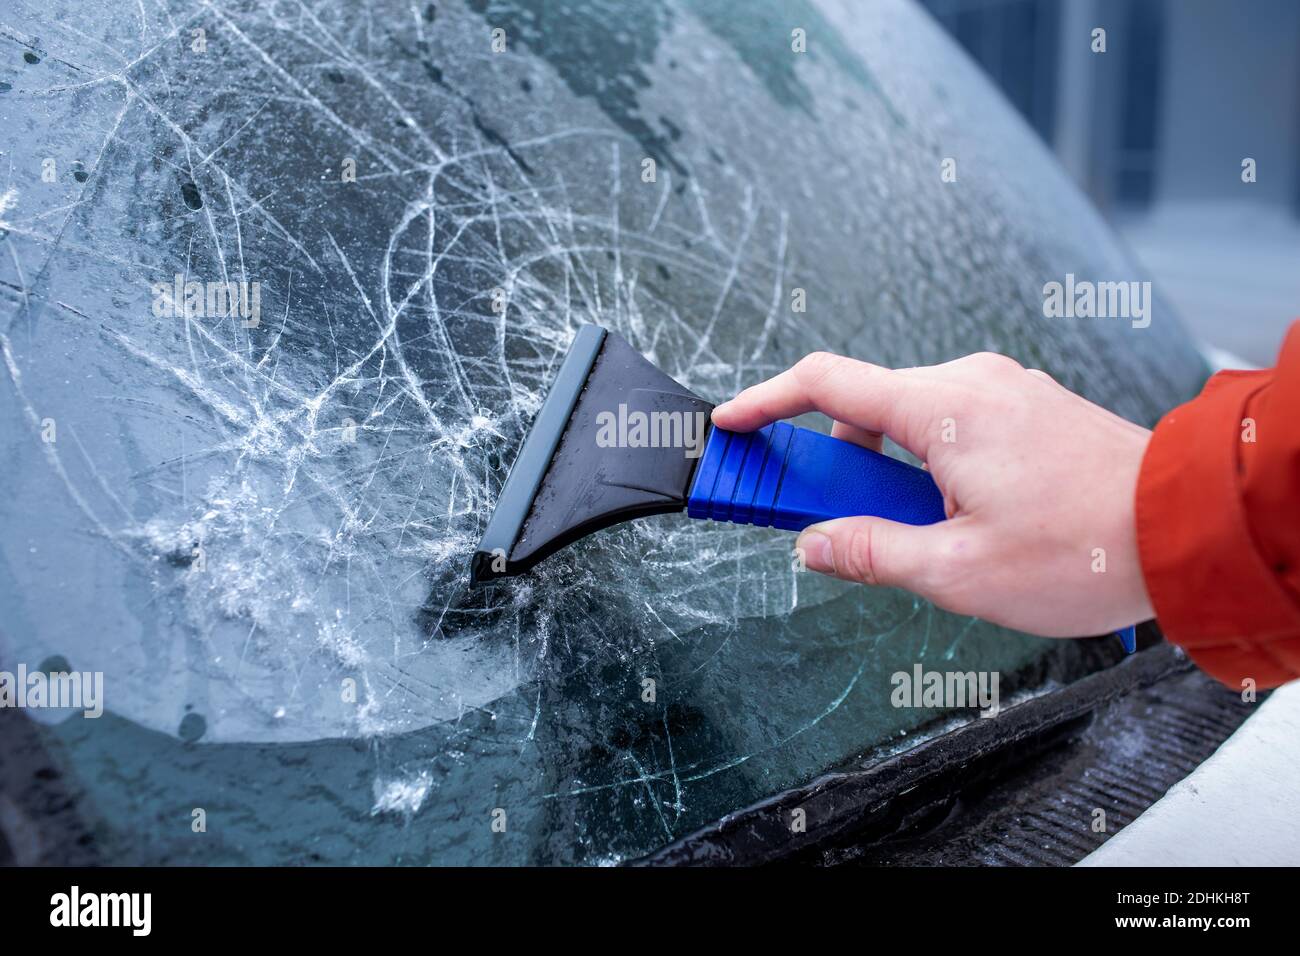 Ice crusted on car windows. Driver is scraping ice off the windshield. Freezing rain, anomalies of nature Stock Photo